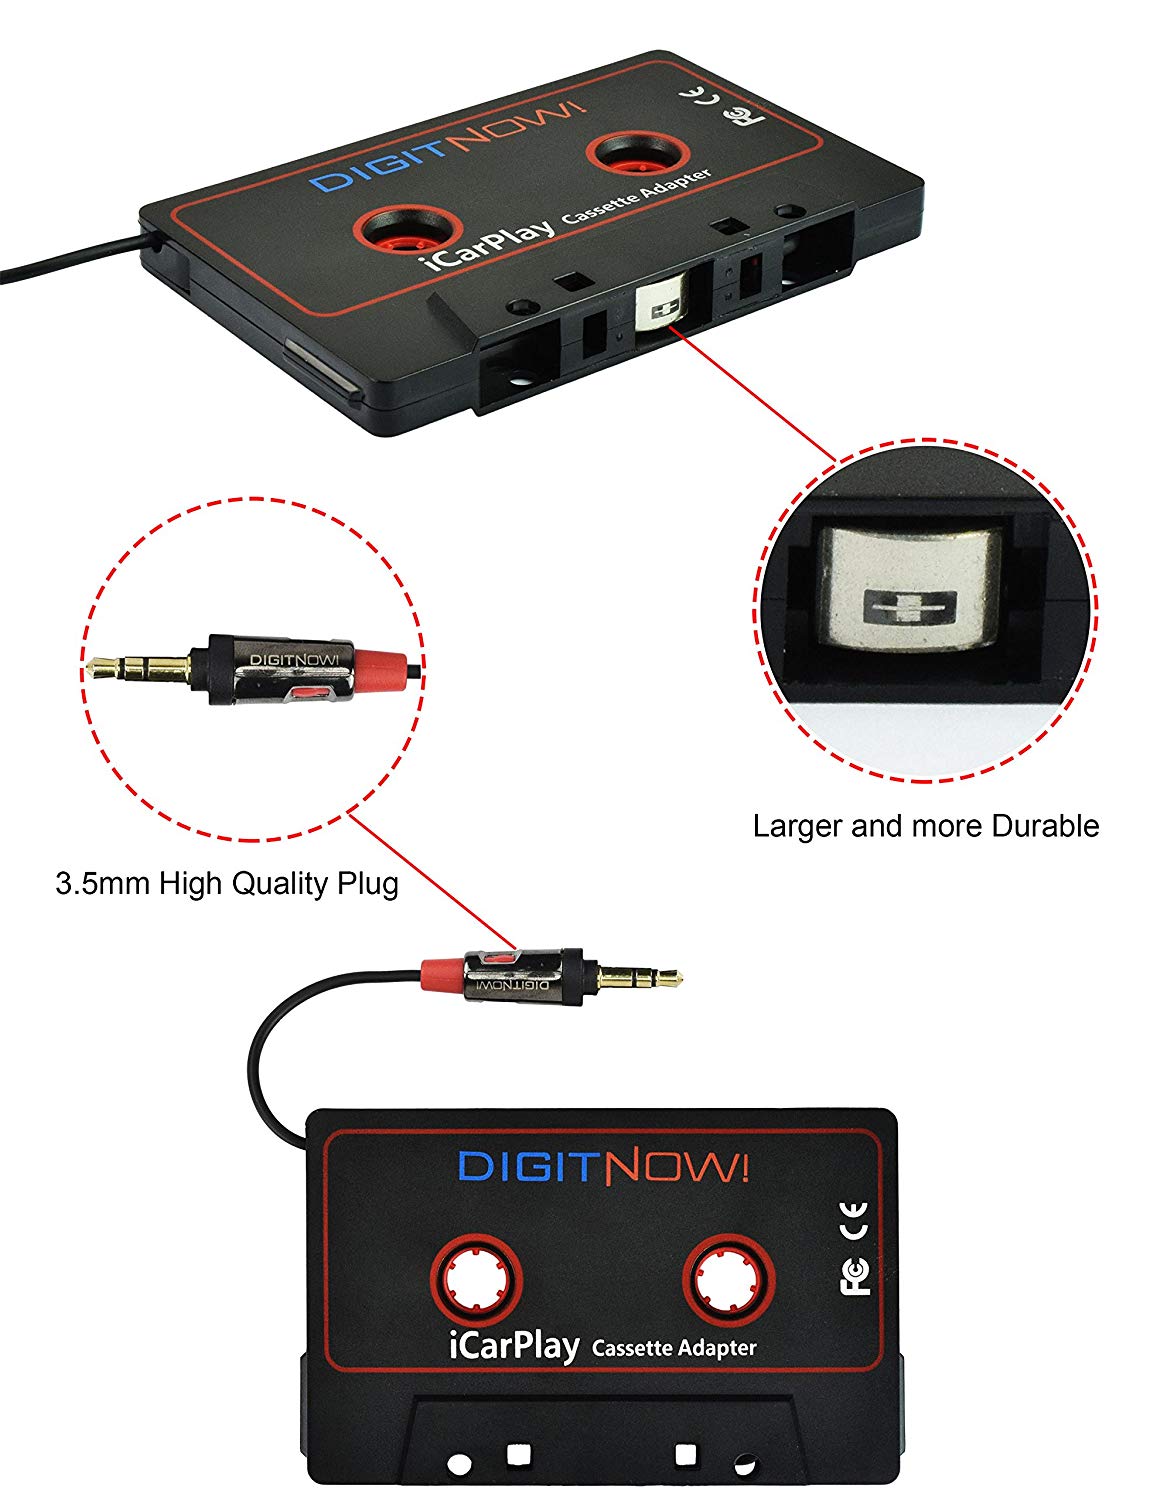 DIGITNOW! Car Cassette Adapter to Play Smartphone Music through